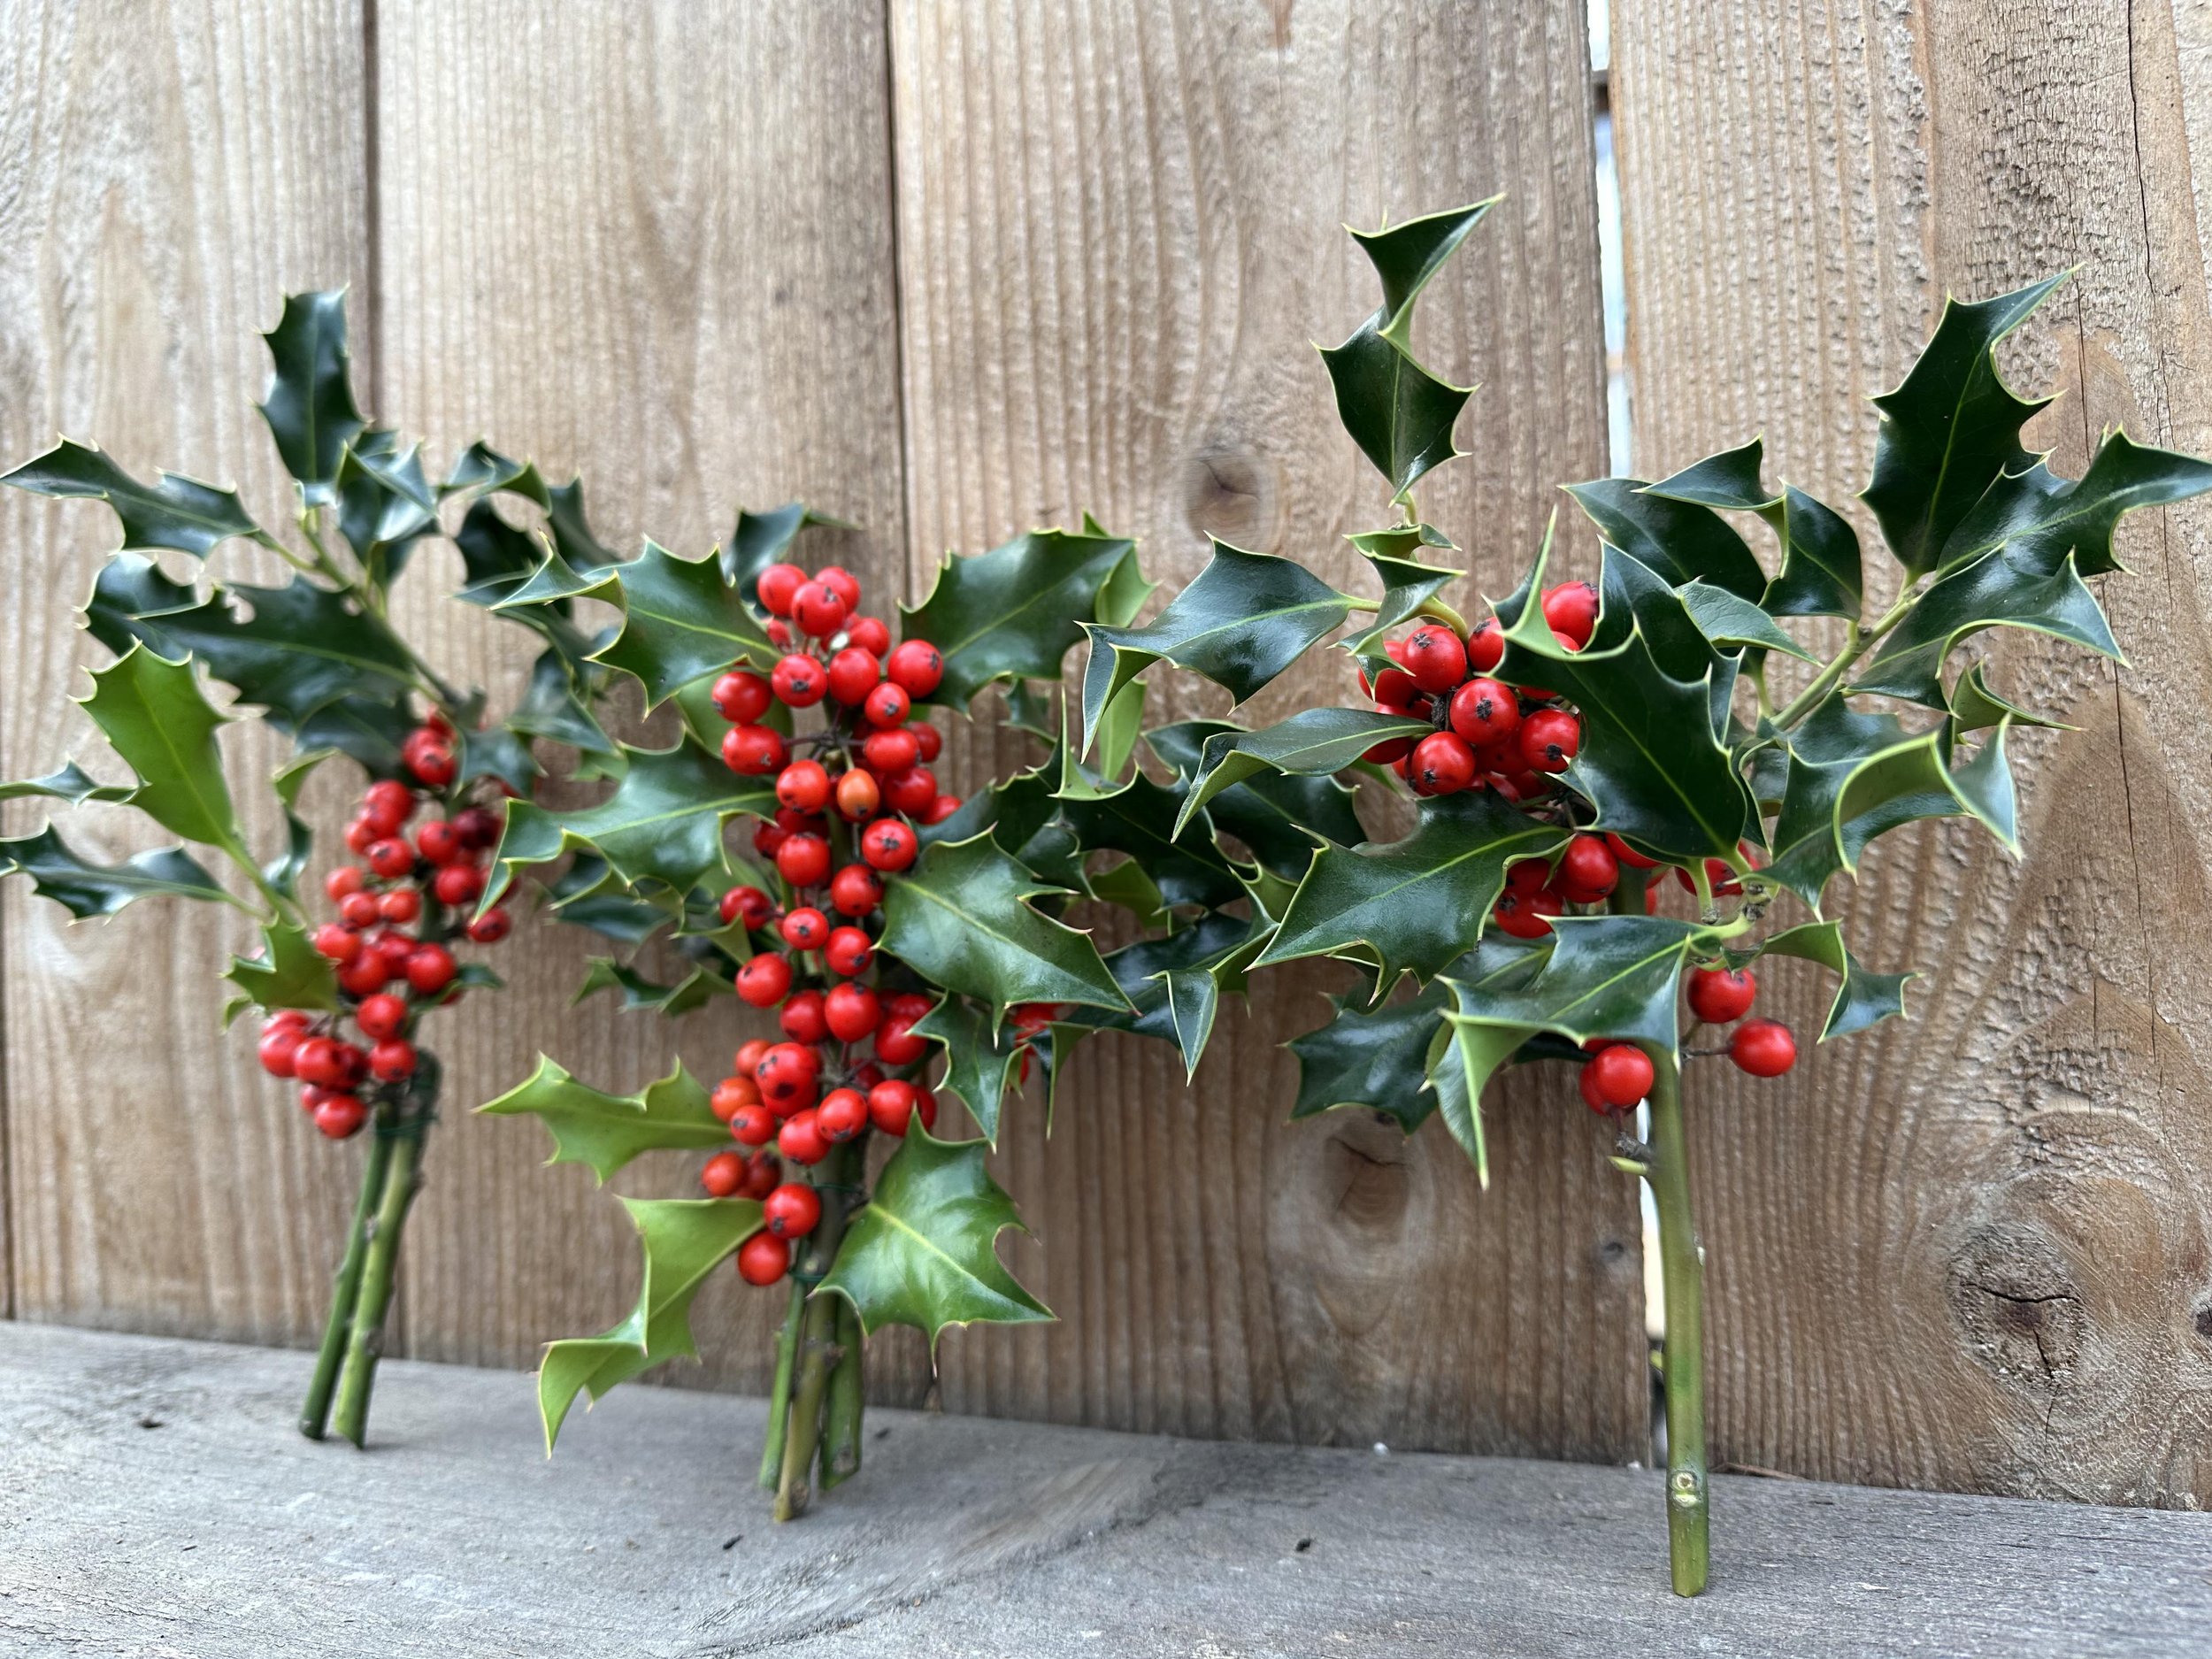 Holly bunches from the side2.jpg